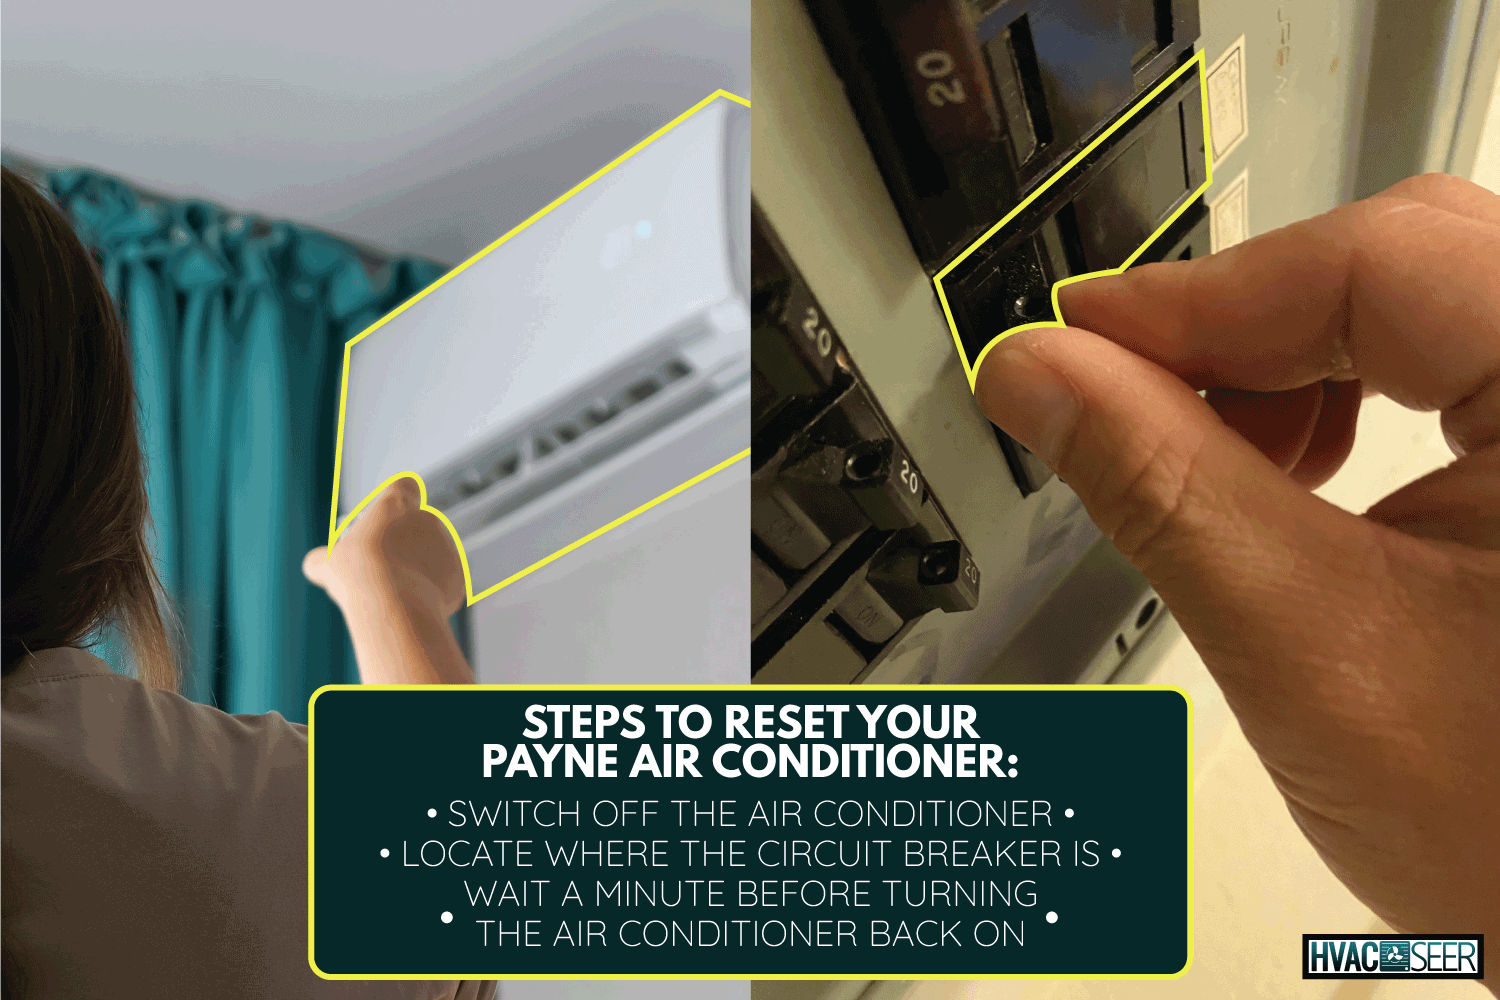 woman turning off AC using remote. hand resetting circuit breaker. How Do I Reset My Payne Air Conditioner